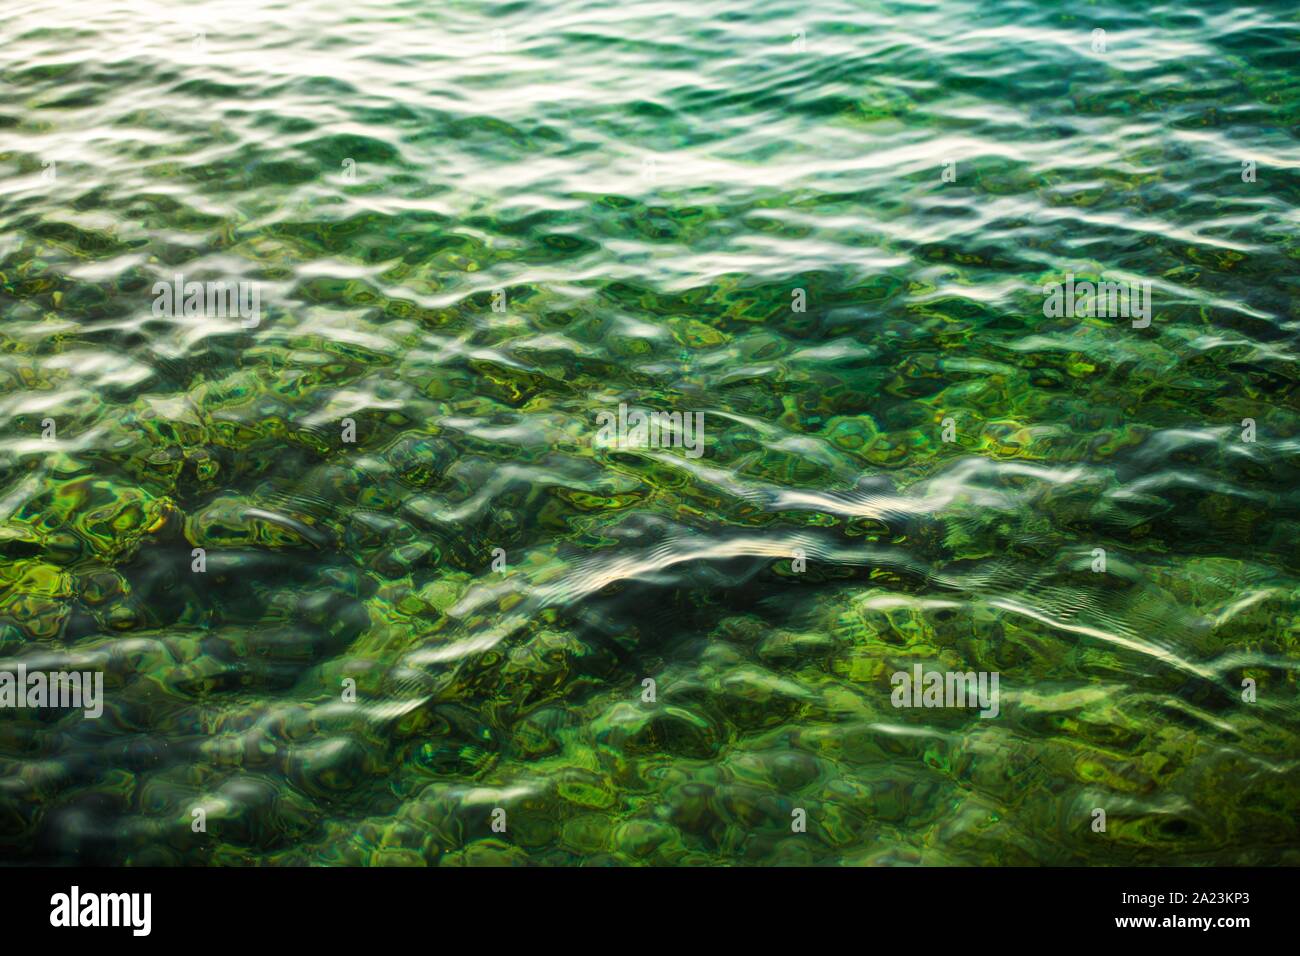 Crystal Clear Lake Water. Nature Details Photo Background. Stock Photo